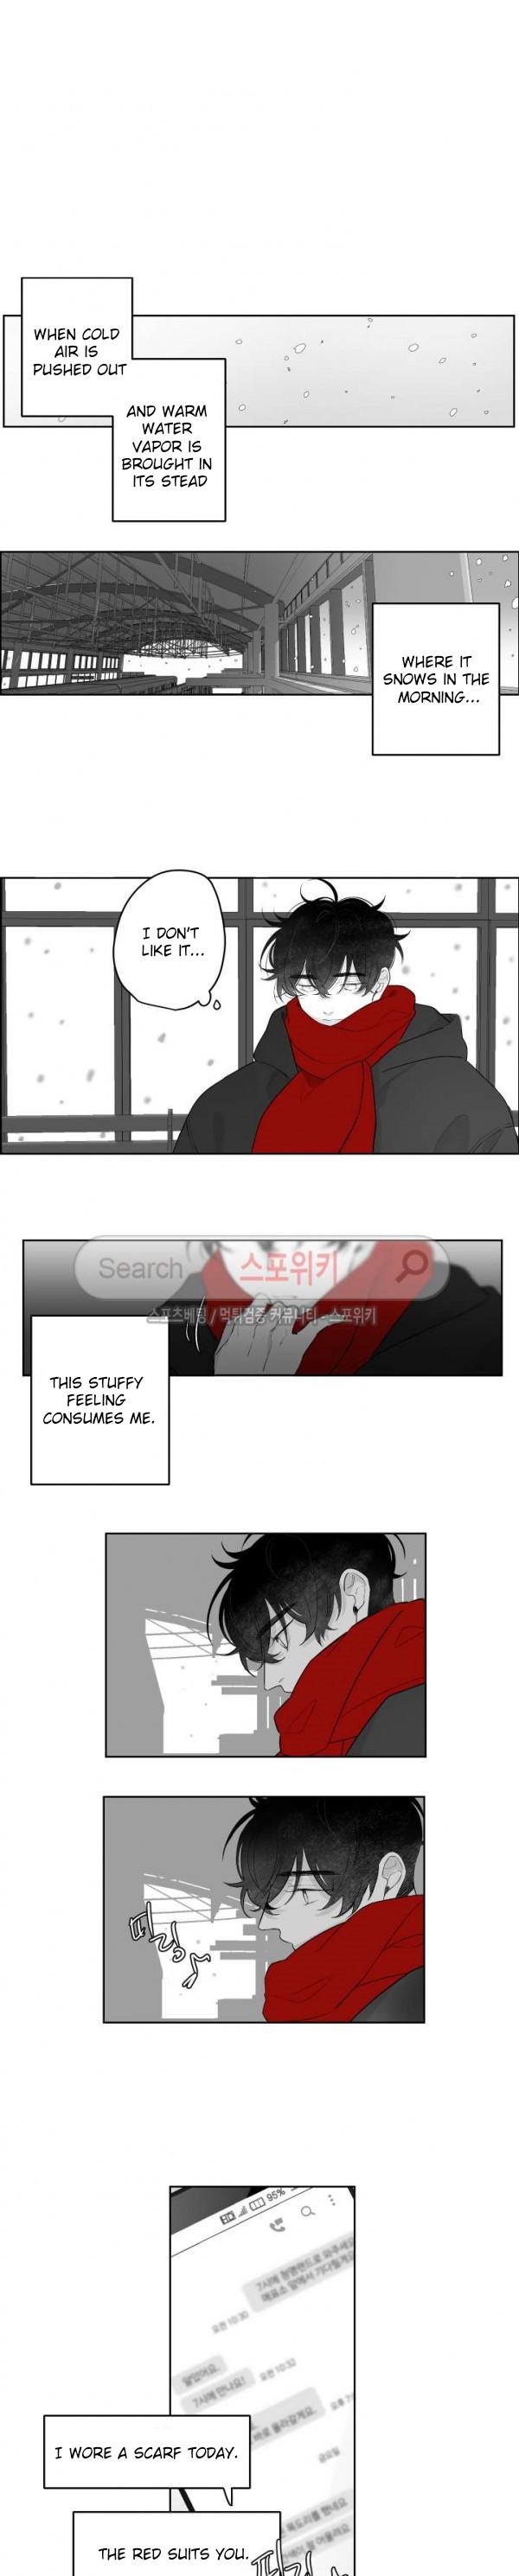 Red Area - Page 1